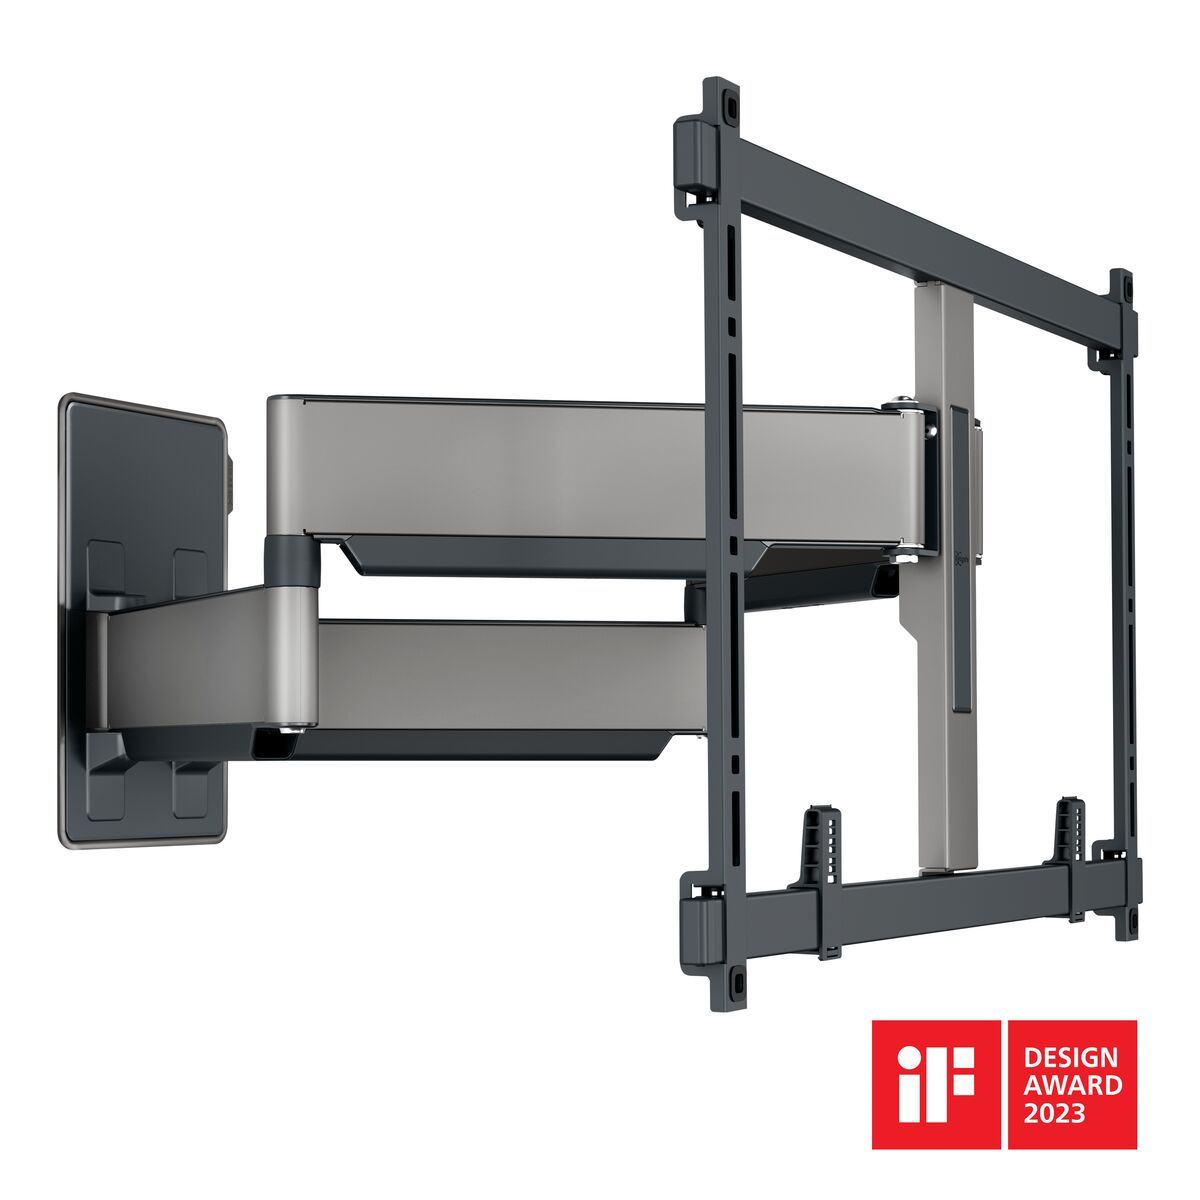 Vogel's TVM 5855 Full-Motion TV Wall Mount - Suitable for 55 up to 100 inch TVs - Forward and turning motion (up to 120°) swivel - Promo